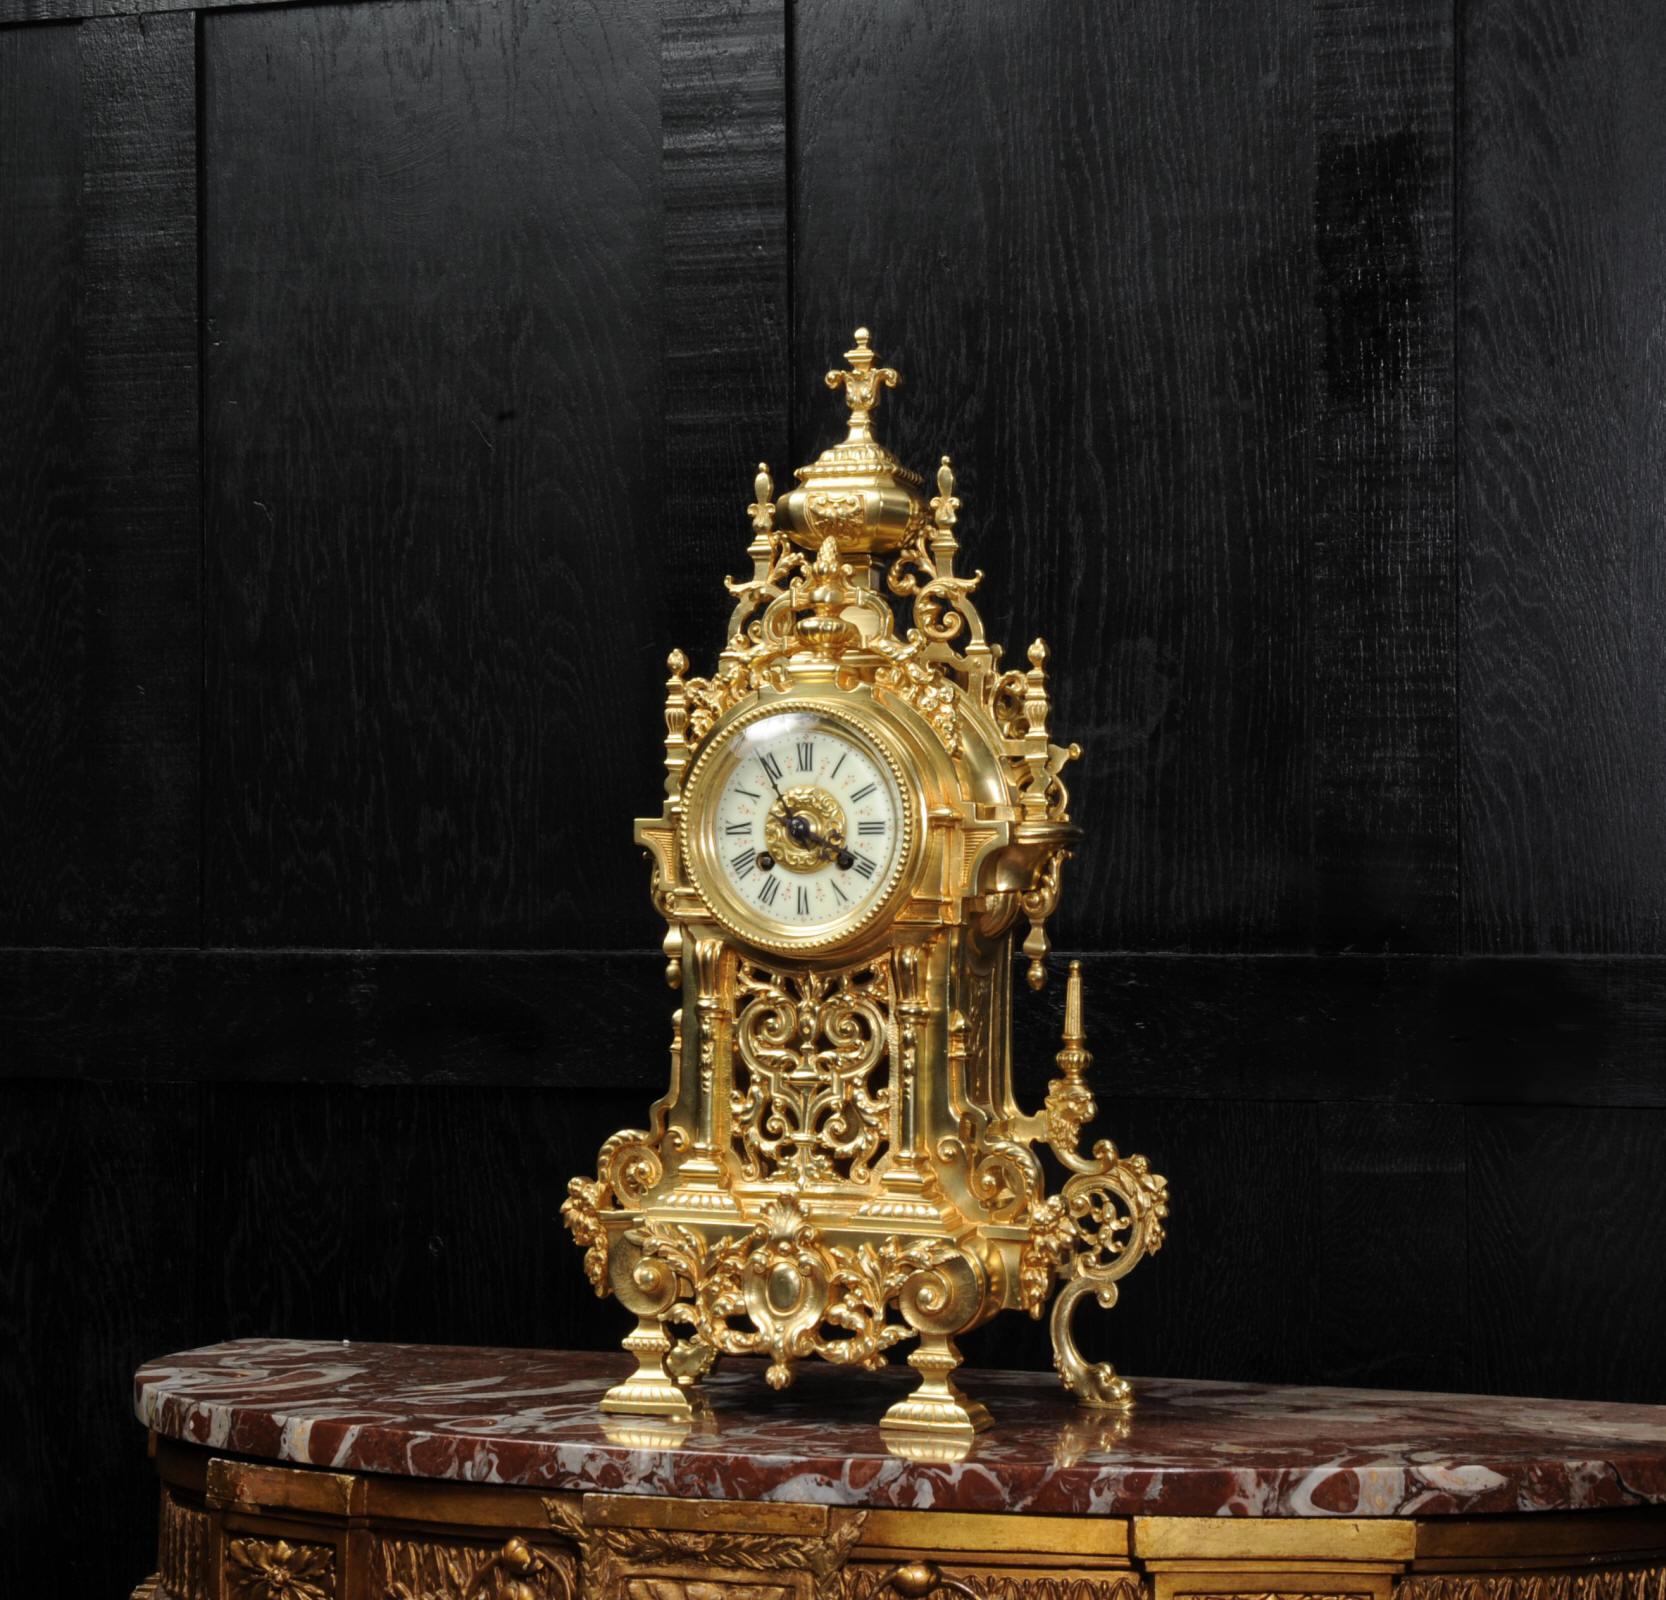 A large and stunning antique French gilt bronze Baroque clock, dating from 1900. It is styled with profuse acanthus decoration applied to the architecturally shaped case. The front is fretted with scrolling acanthus to allow the pendulum to be seen